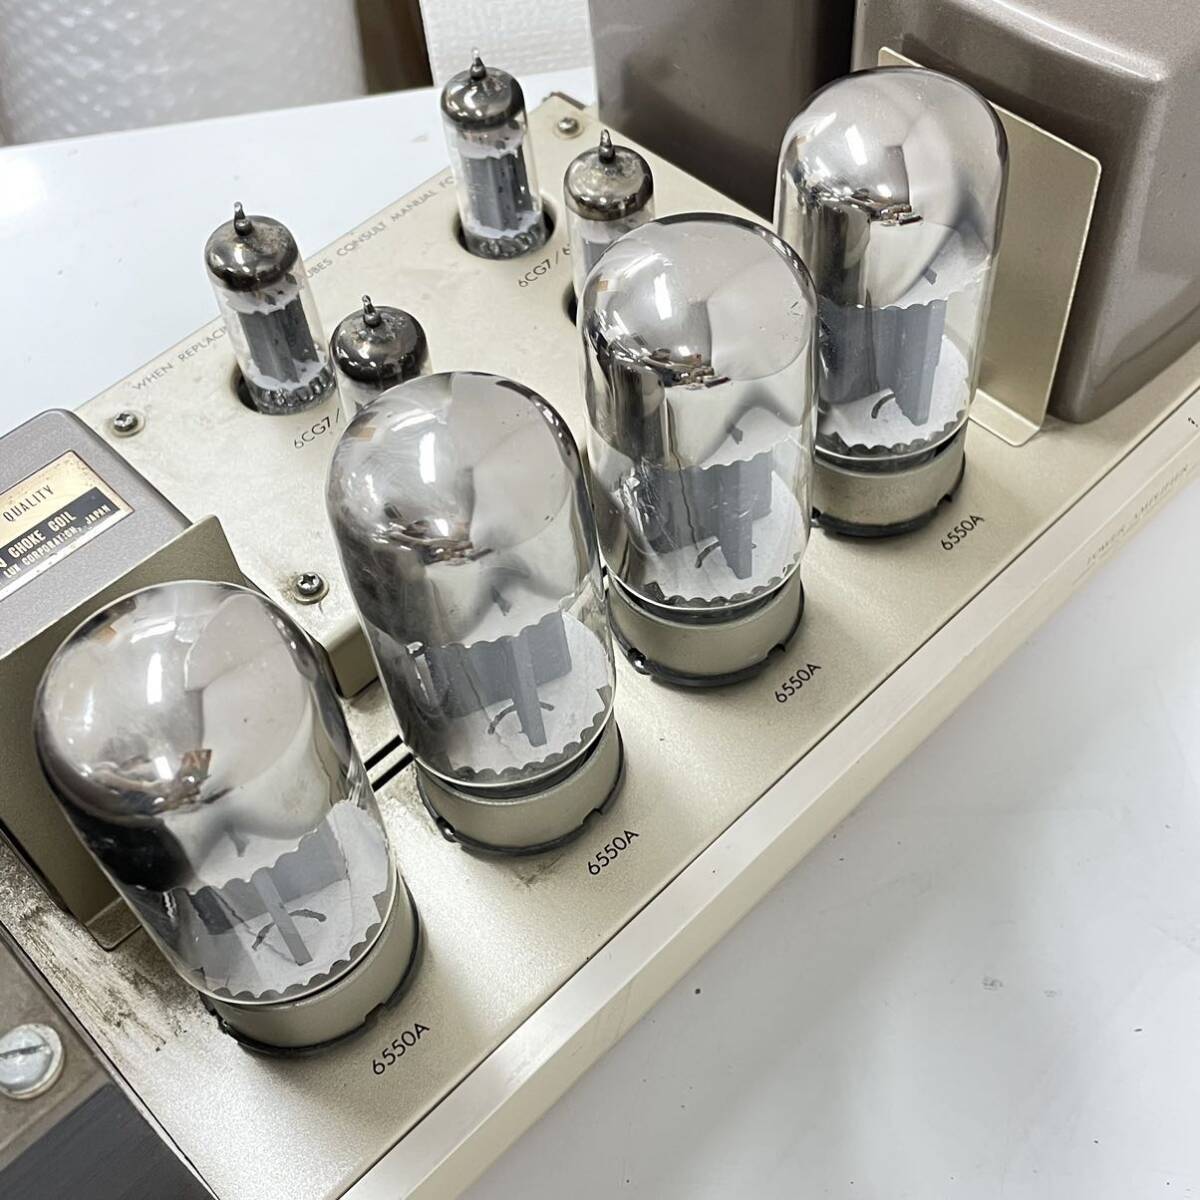 LUXKIT A3550 POWER AMPLIFIER tube amplifier WILLIAMSON LUXMAN Lux kit vacuum tube power amplifier present condition goods electrification OK